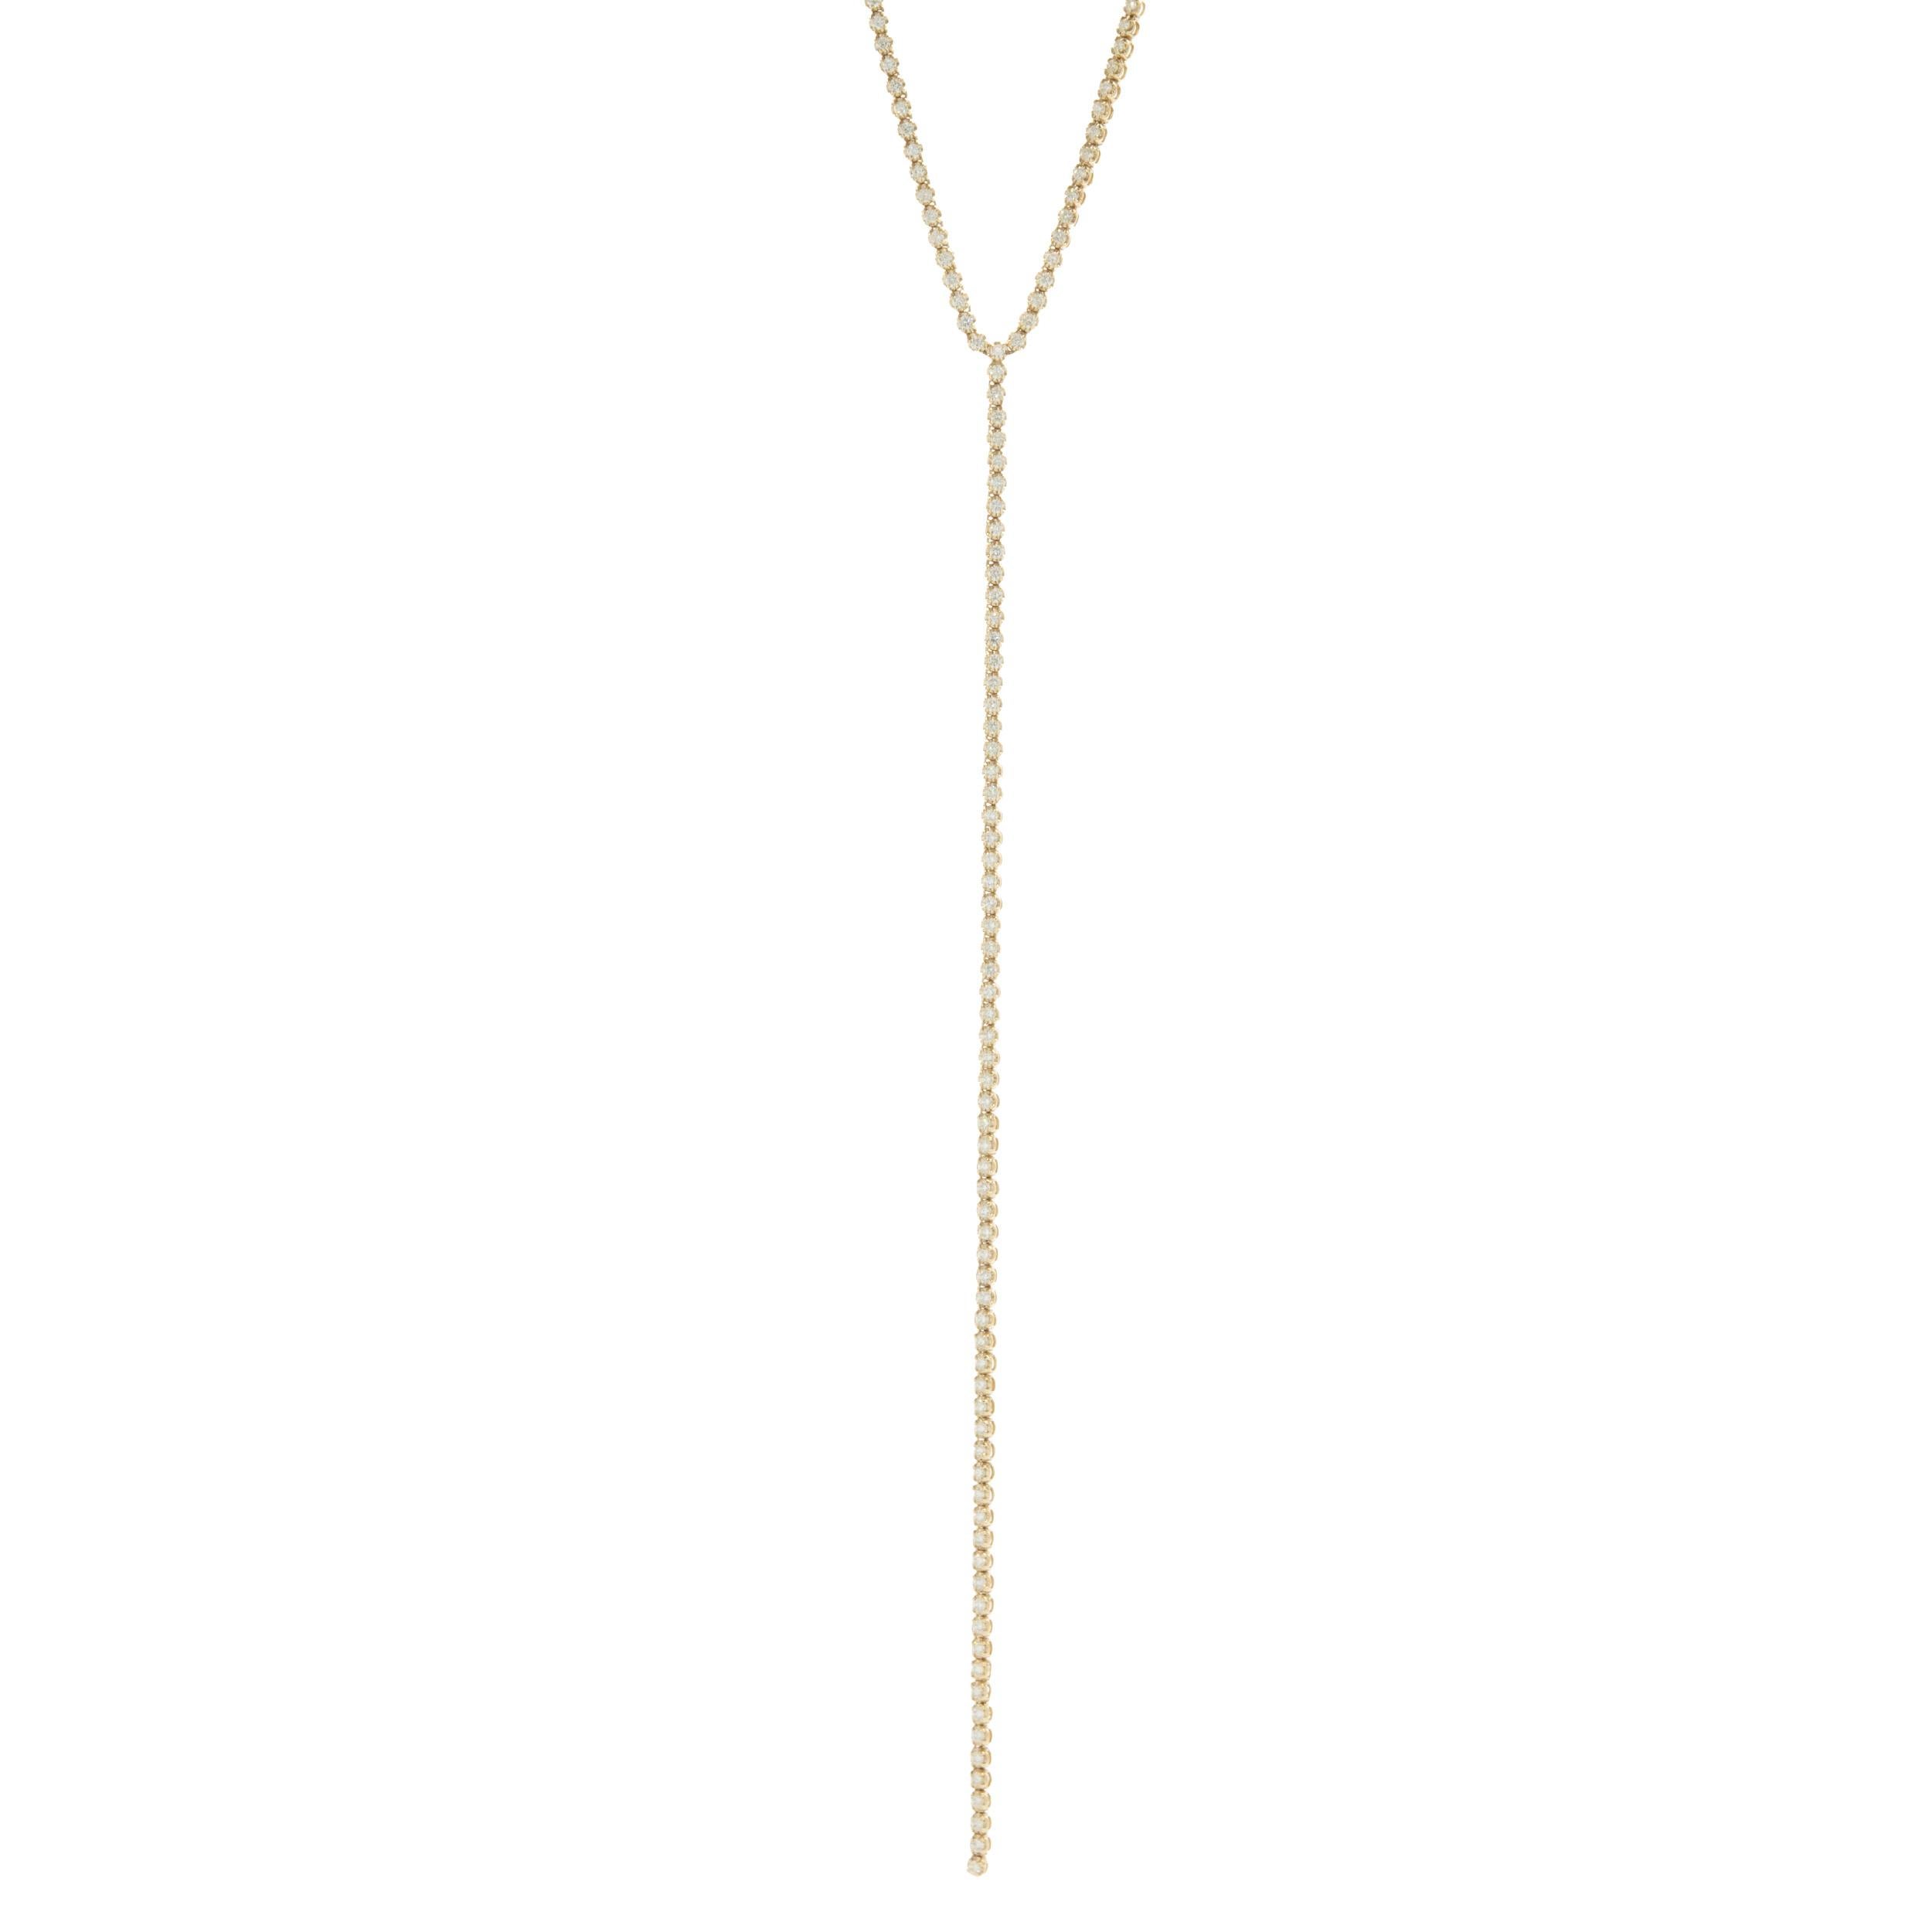 Designer: custom design
Material: 14K yellow gold
Diamond: round brilliant cut = 4.50cttw
Color: G
Clarity: SI1
Dimensions: necklace adjust from 16-22-inches in length 
Weight: 15.11 grams
